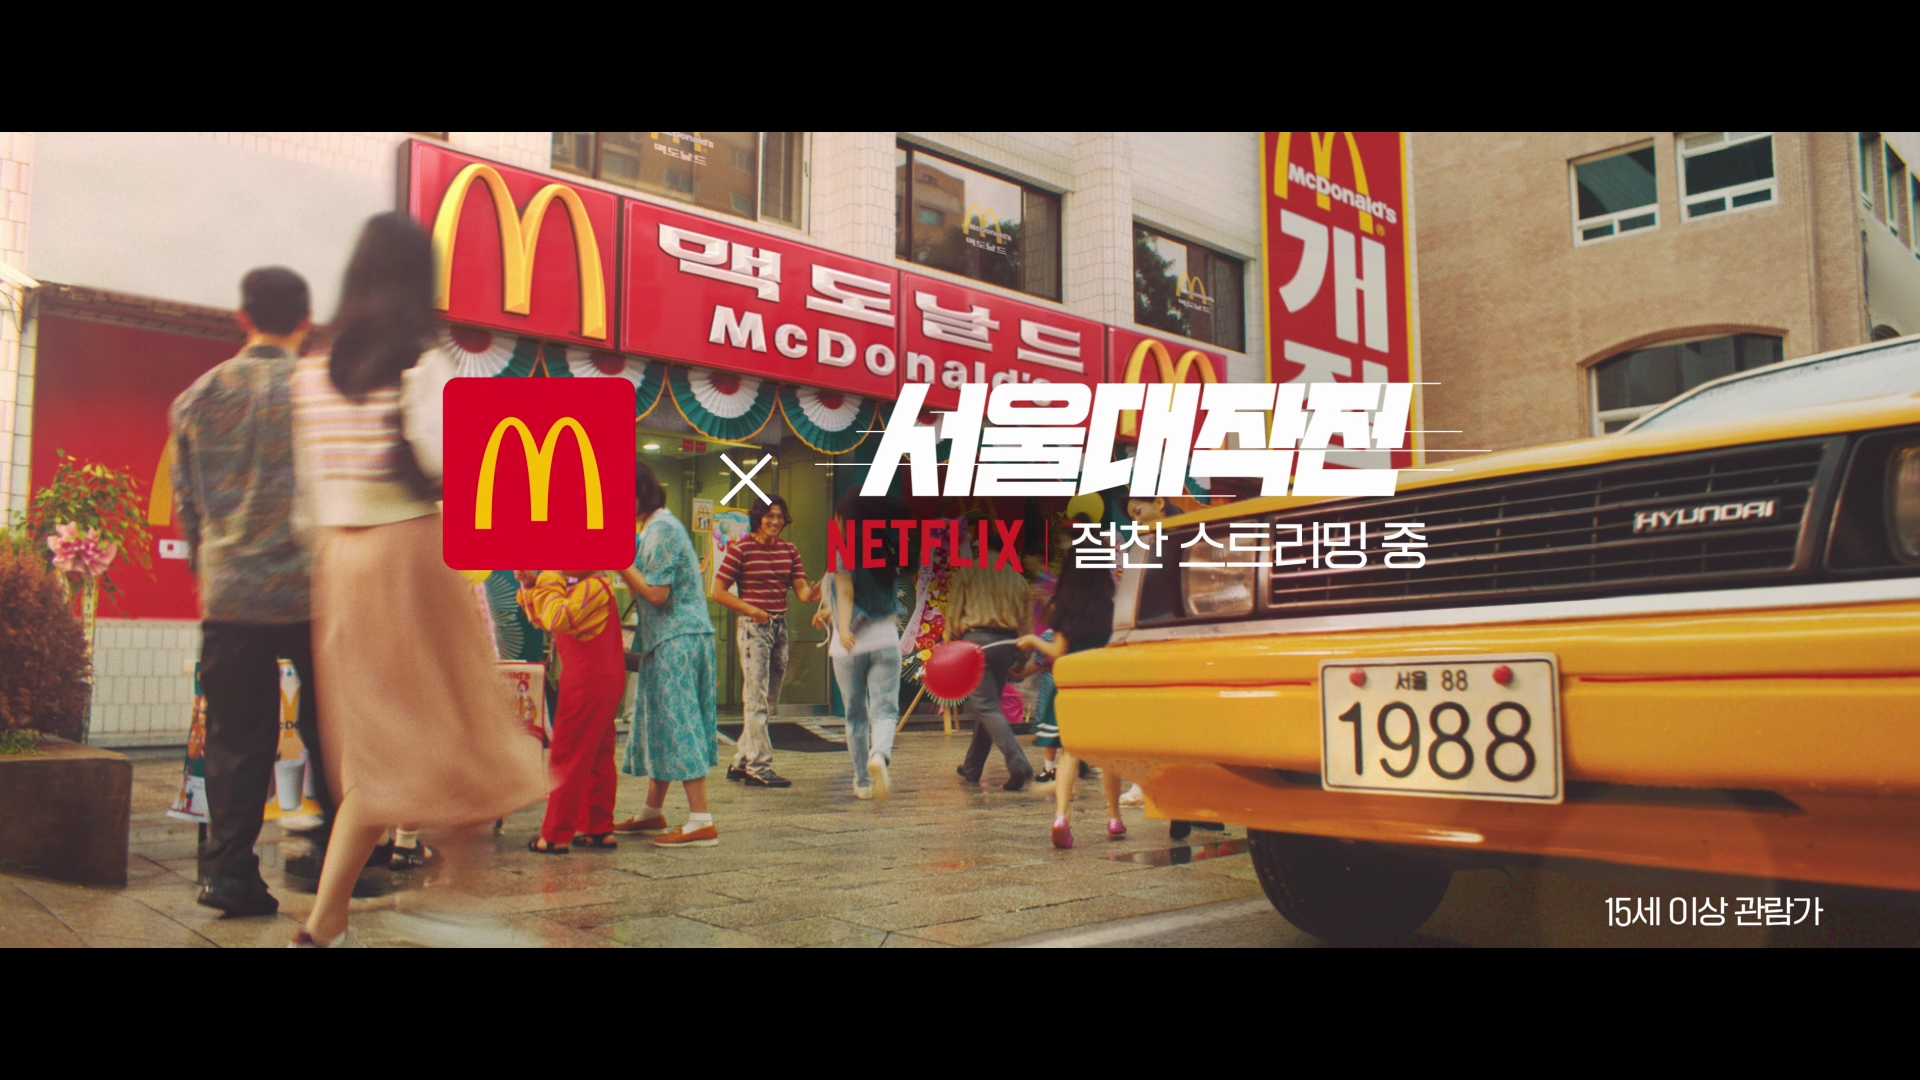 A screenshot from a McDonald's Korea commercial with a 1988 setting.